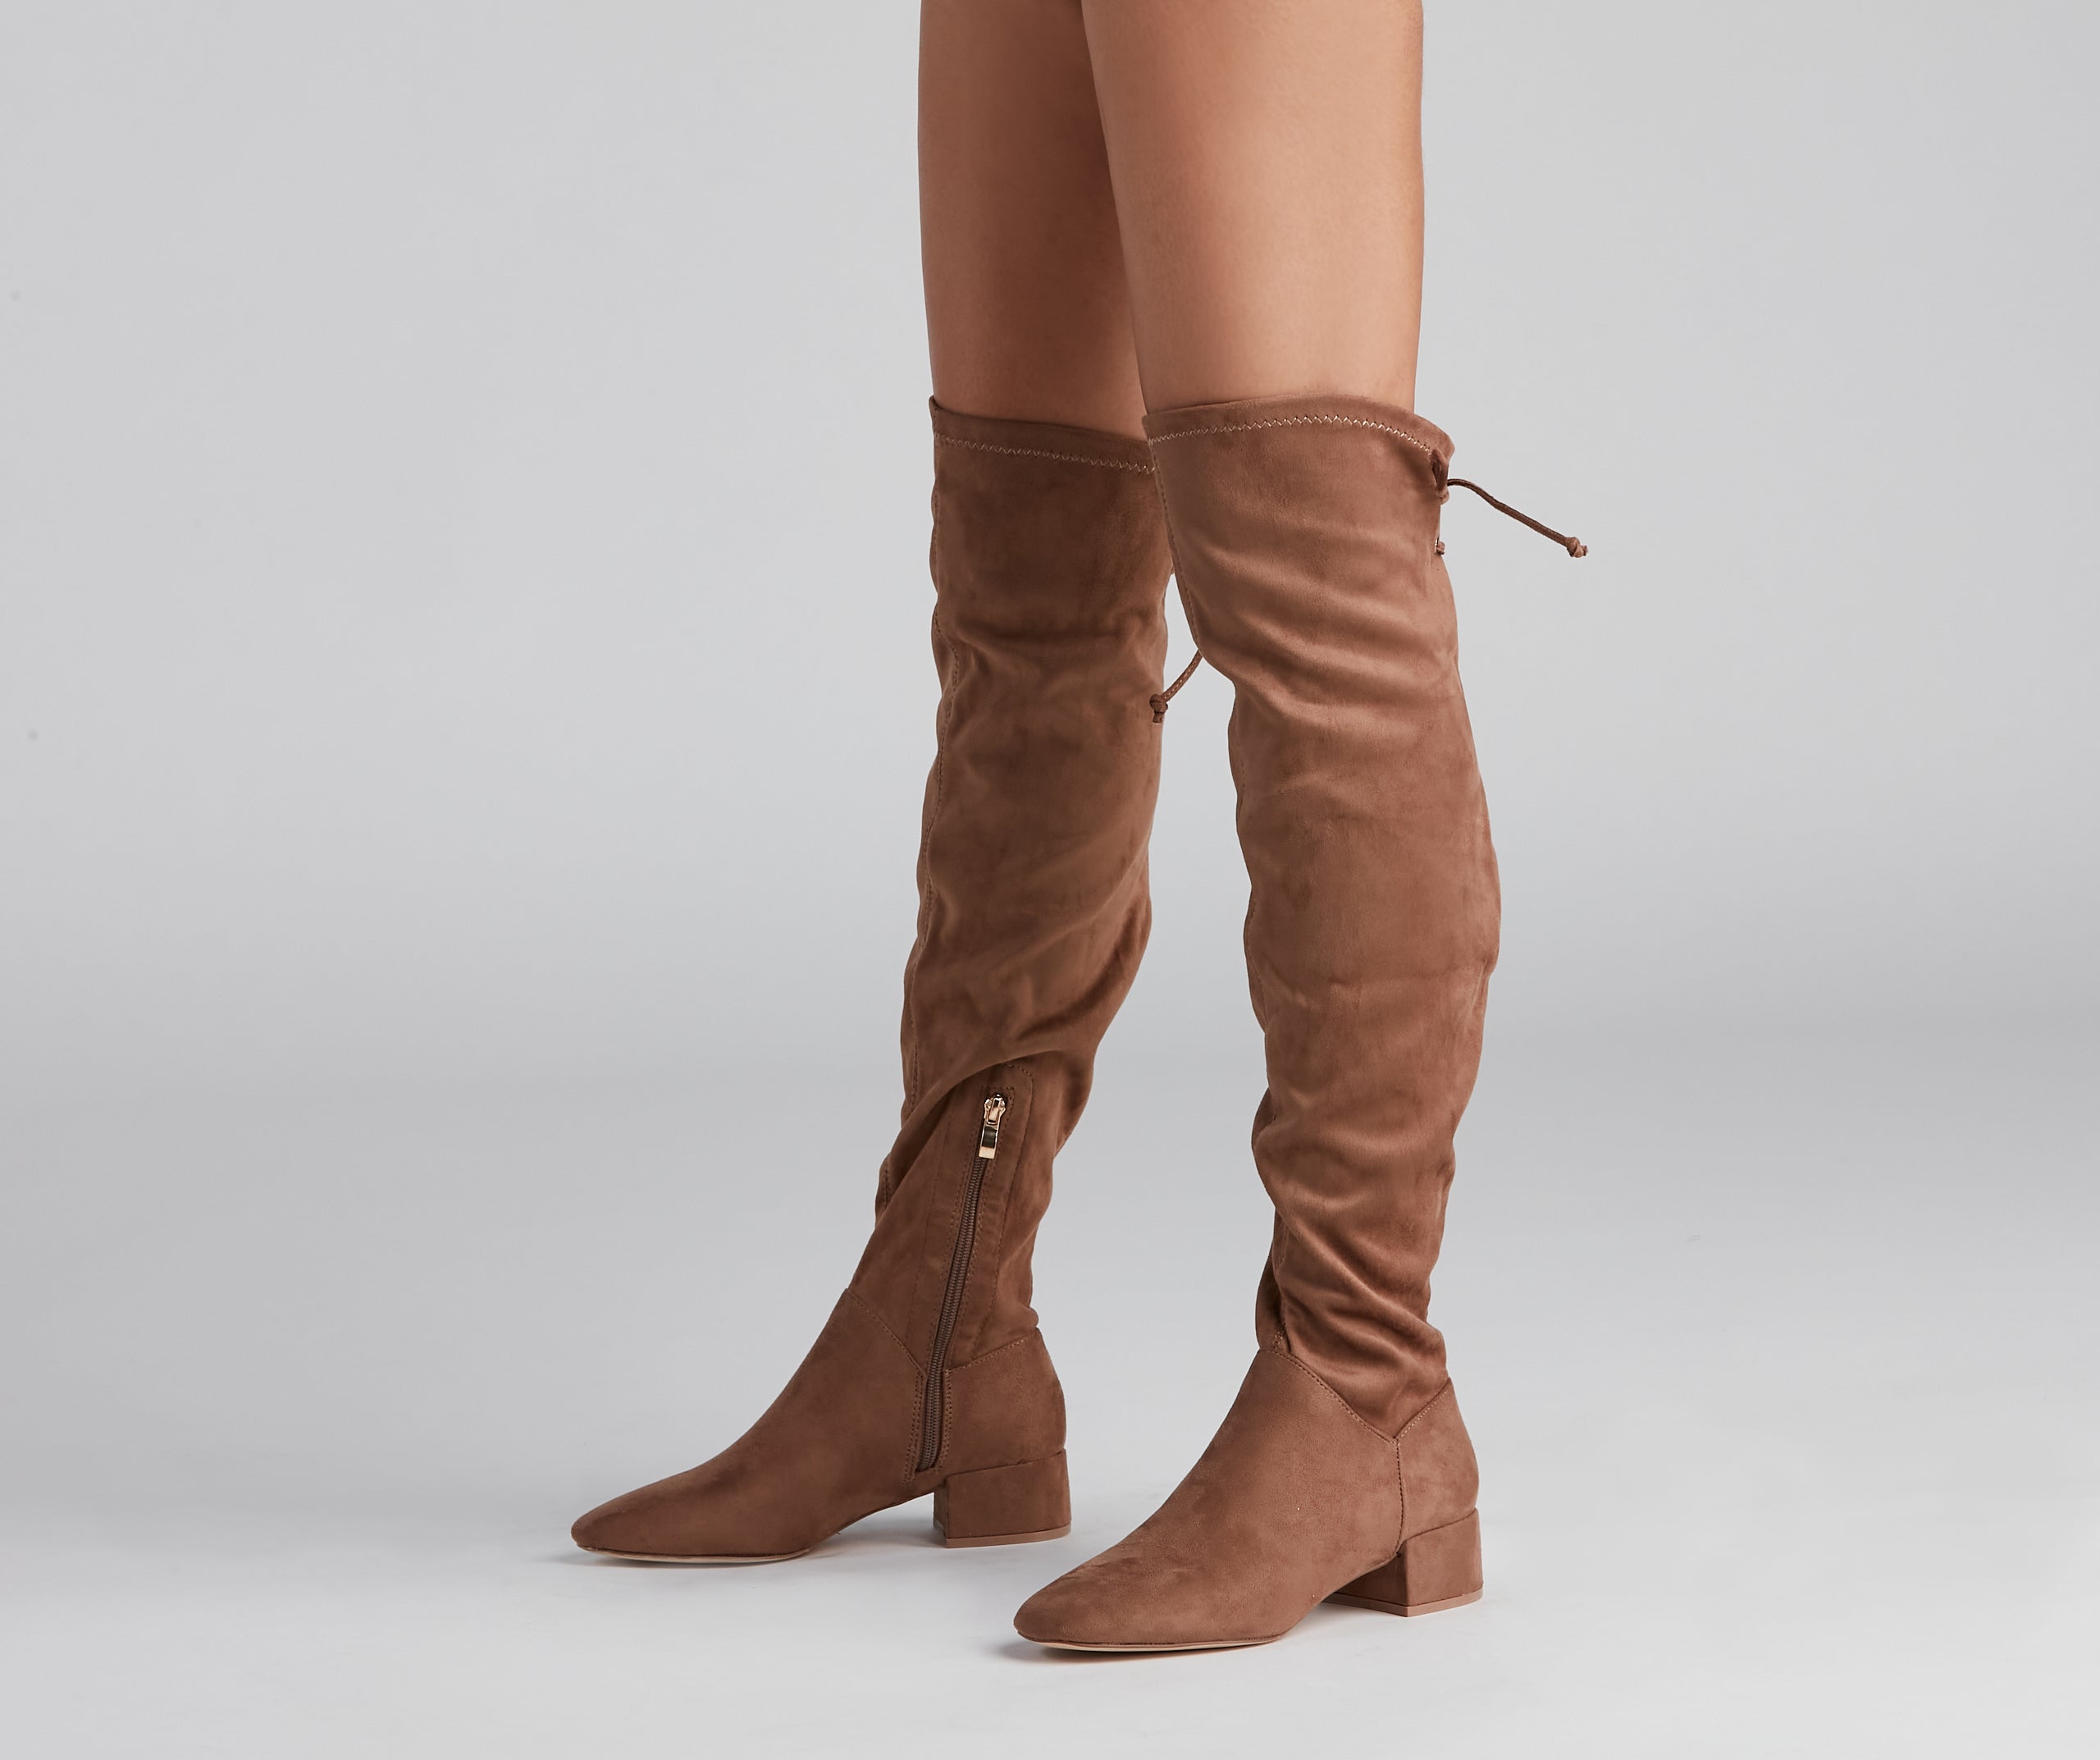 Everyday Chic Over-The-Knee Boots